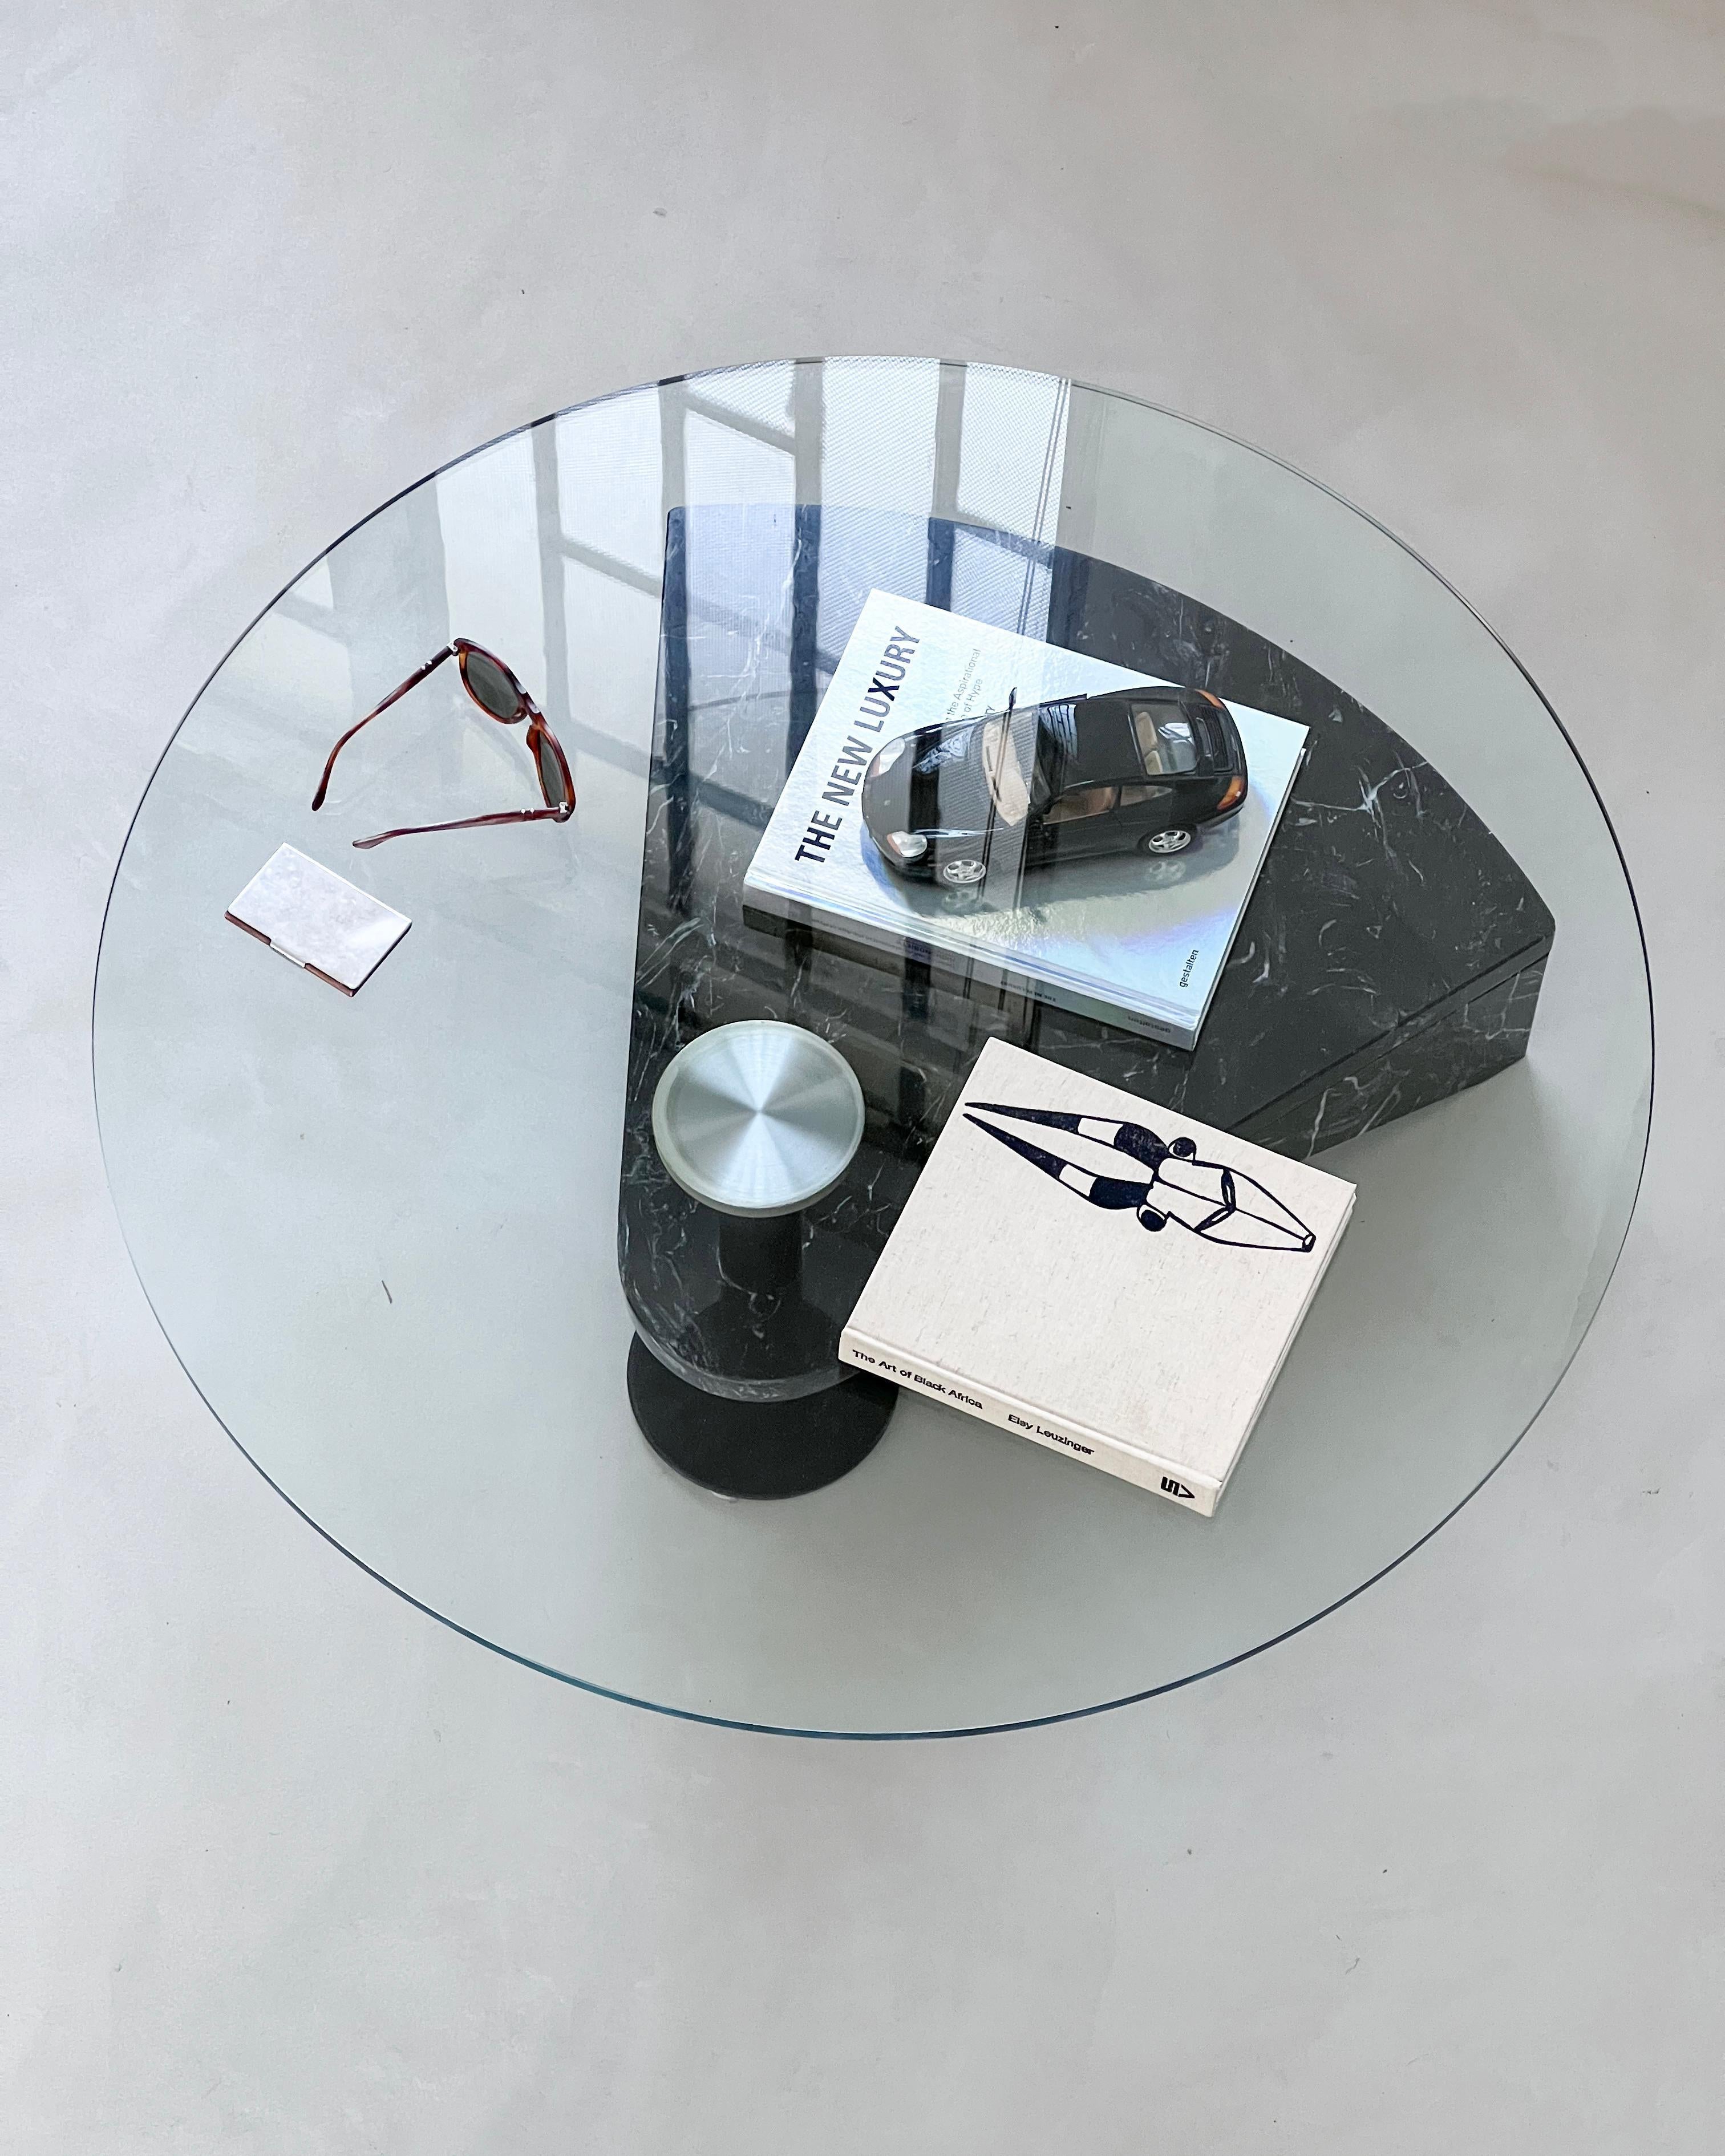 Sculptural modern coffee/cocktail table in black marble and glass by Acerbis, Italy, dating to the 1990s. It's a very nice, architectural piece, that looks great from every angle and is extremely satisfying to style. The black marble base also